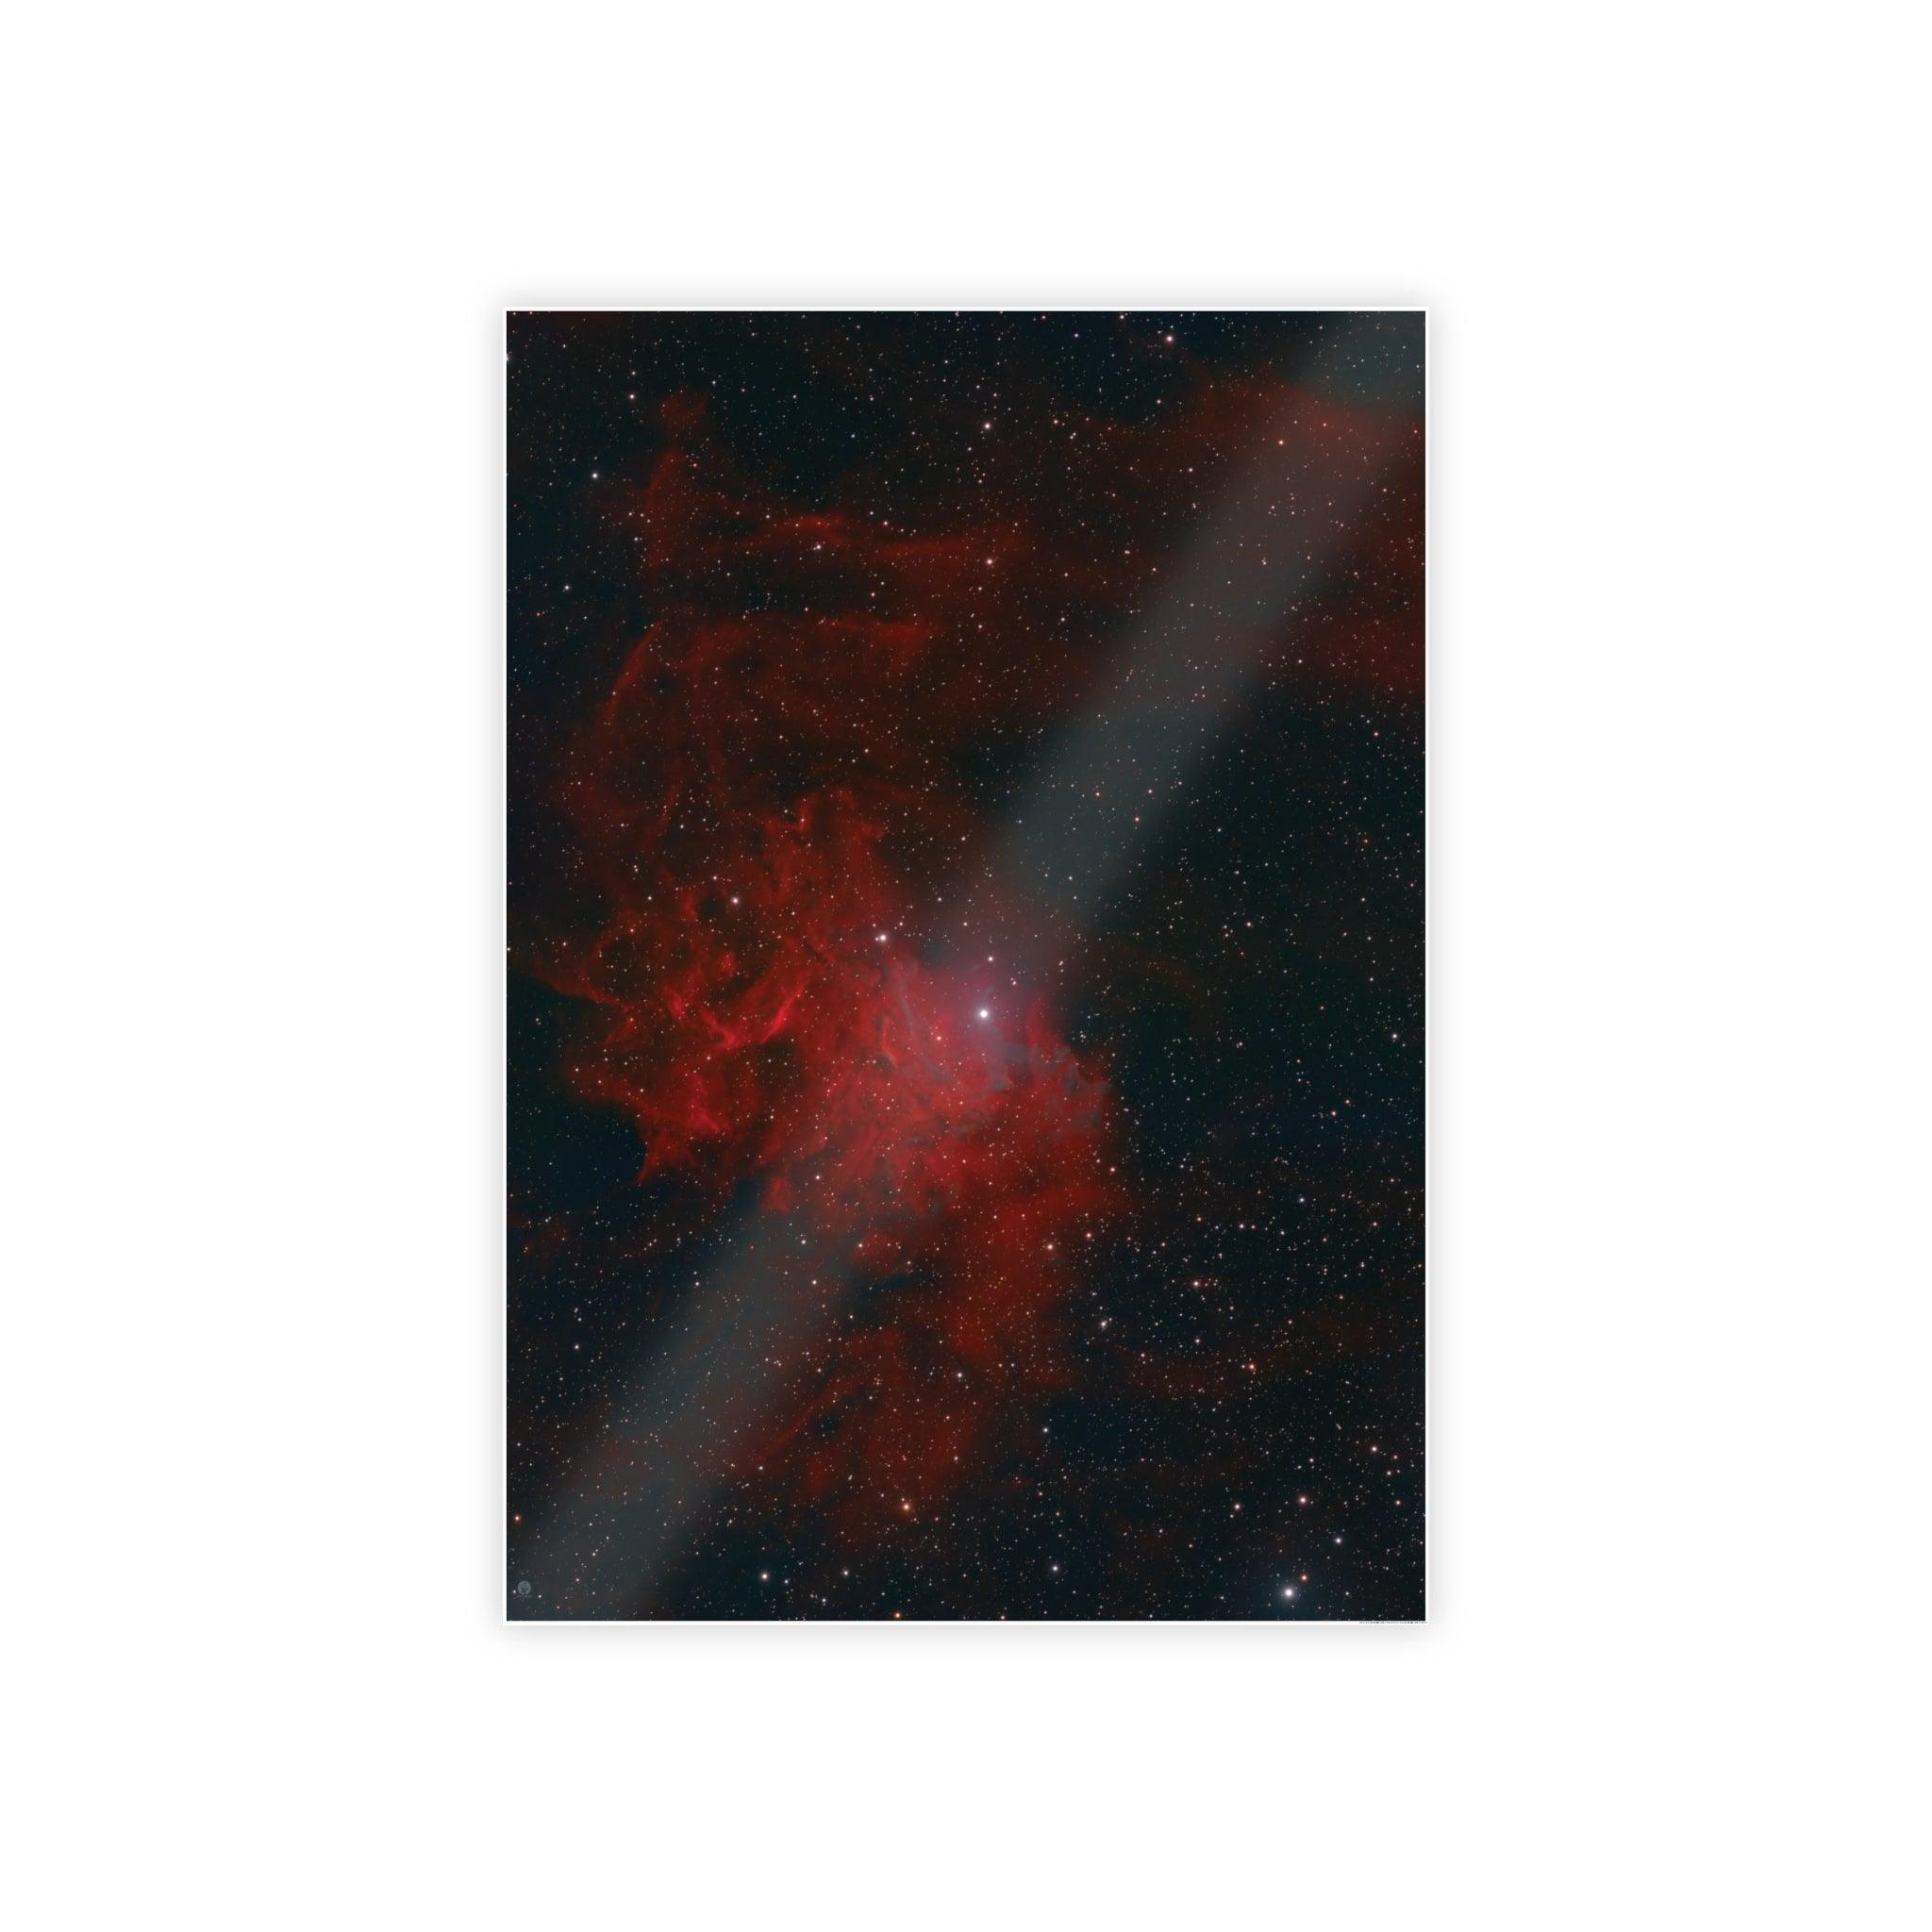 Poster of the Flaming Star Nebula (IC-405)